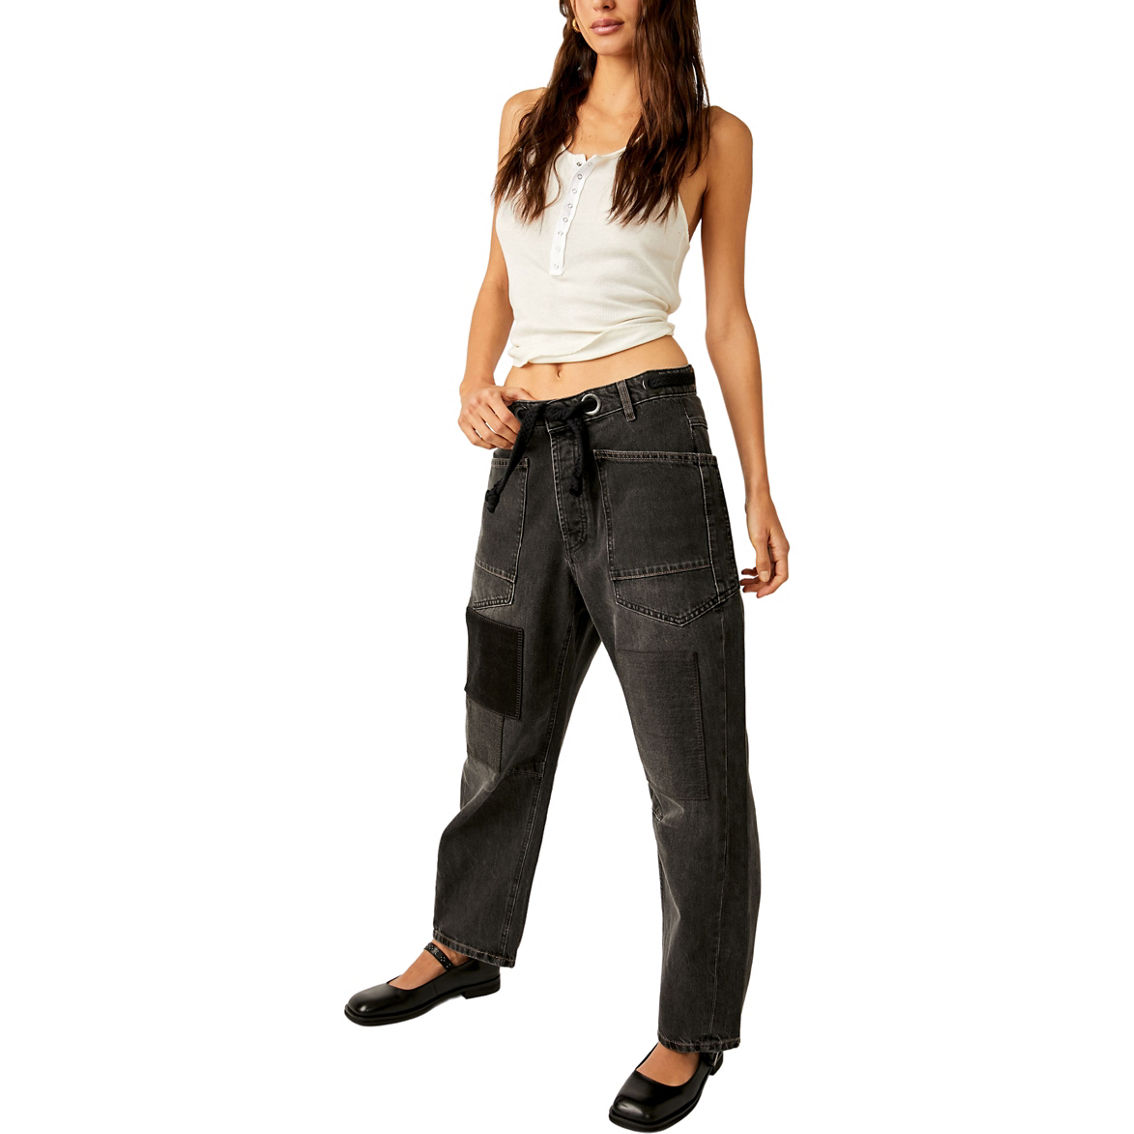 Free People Double Dutch Coated Pull On Jeans - Image 4 of 5